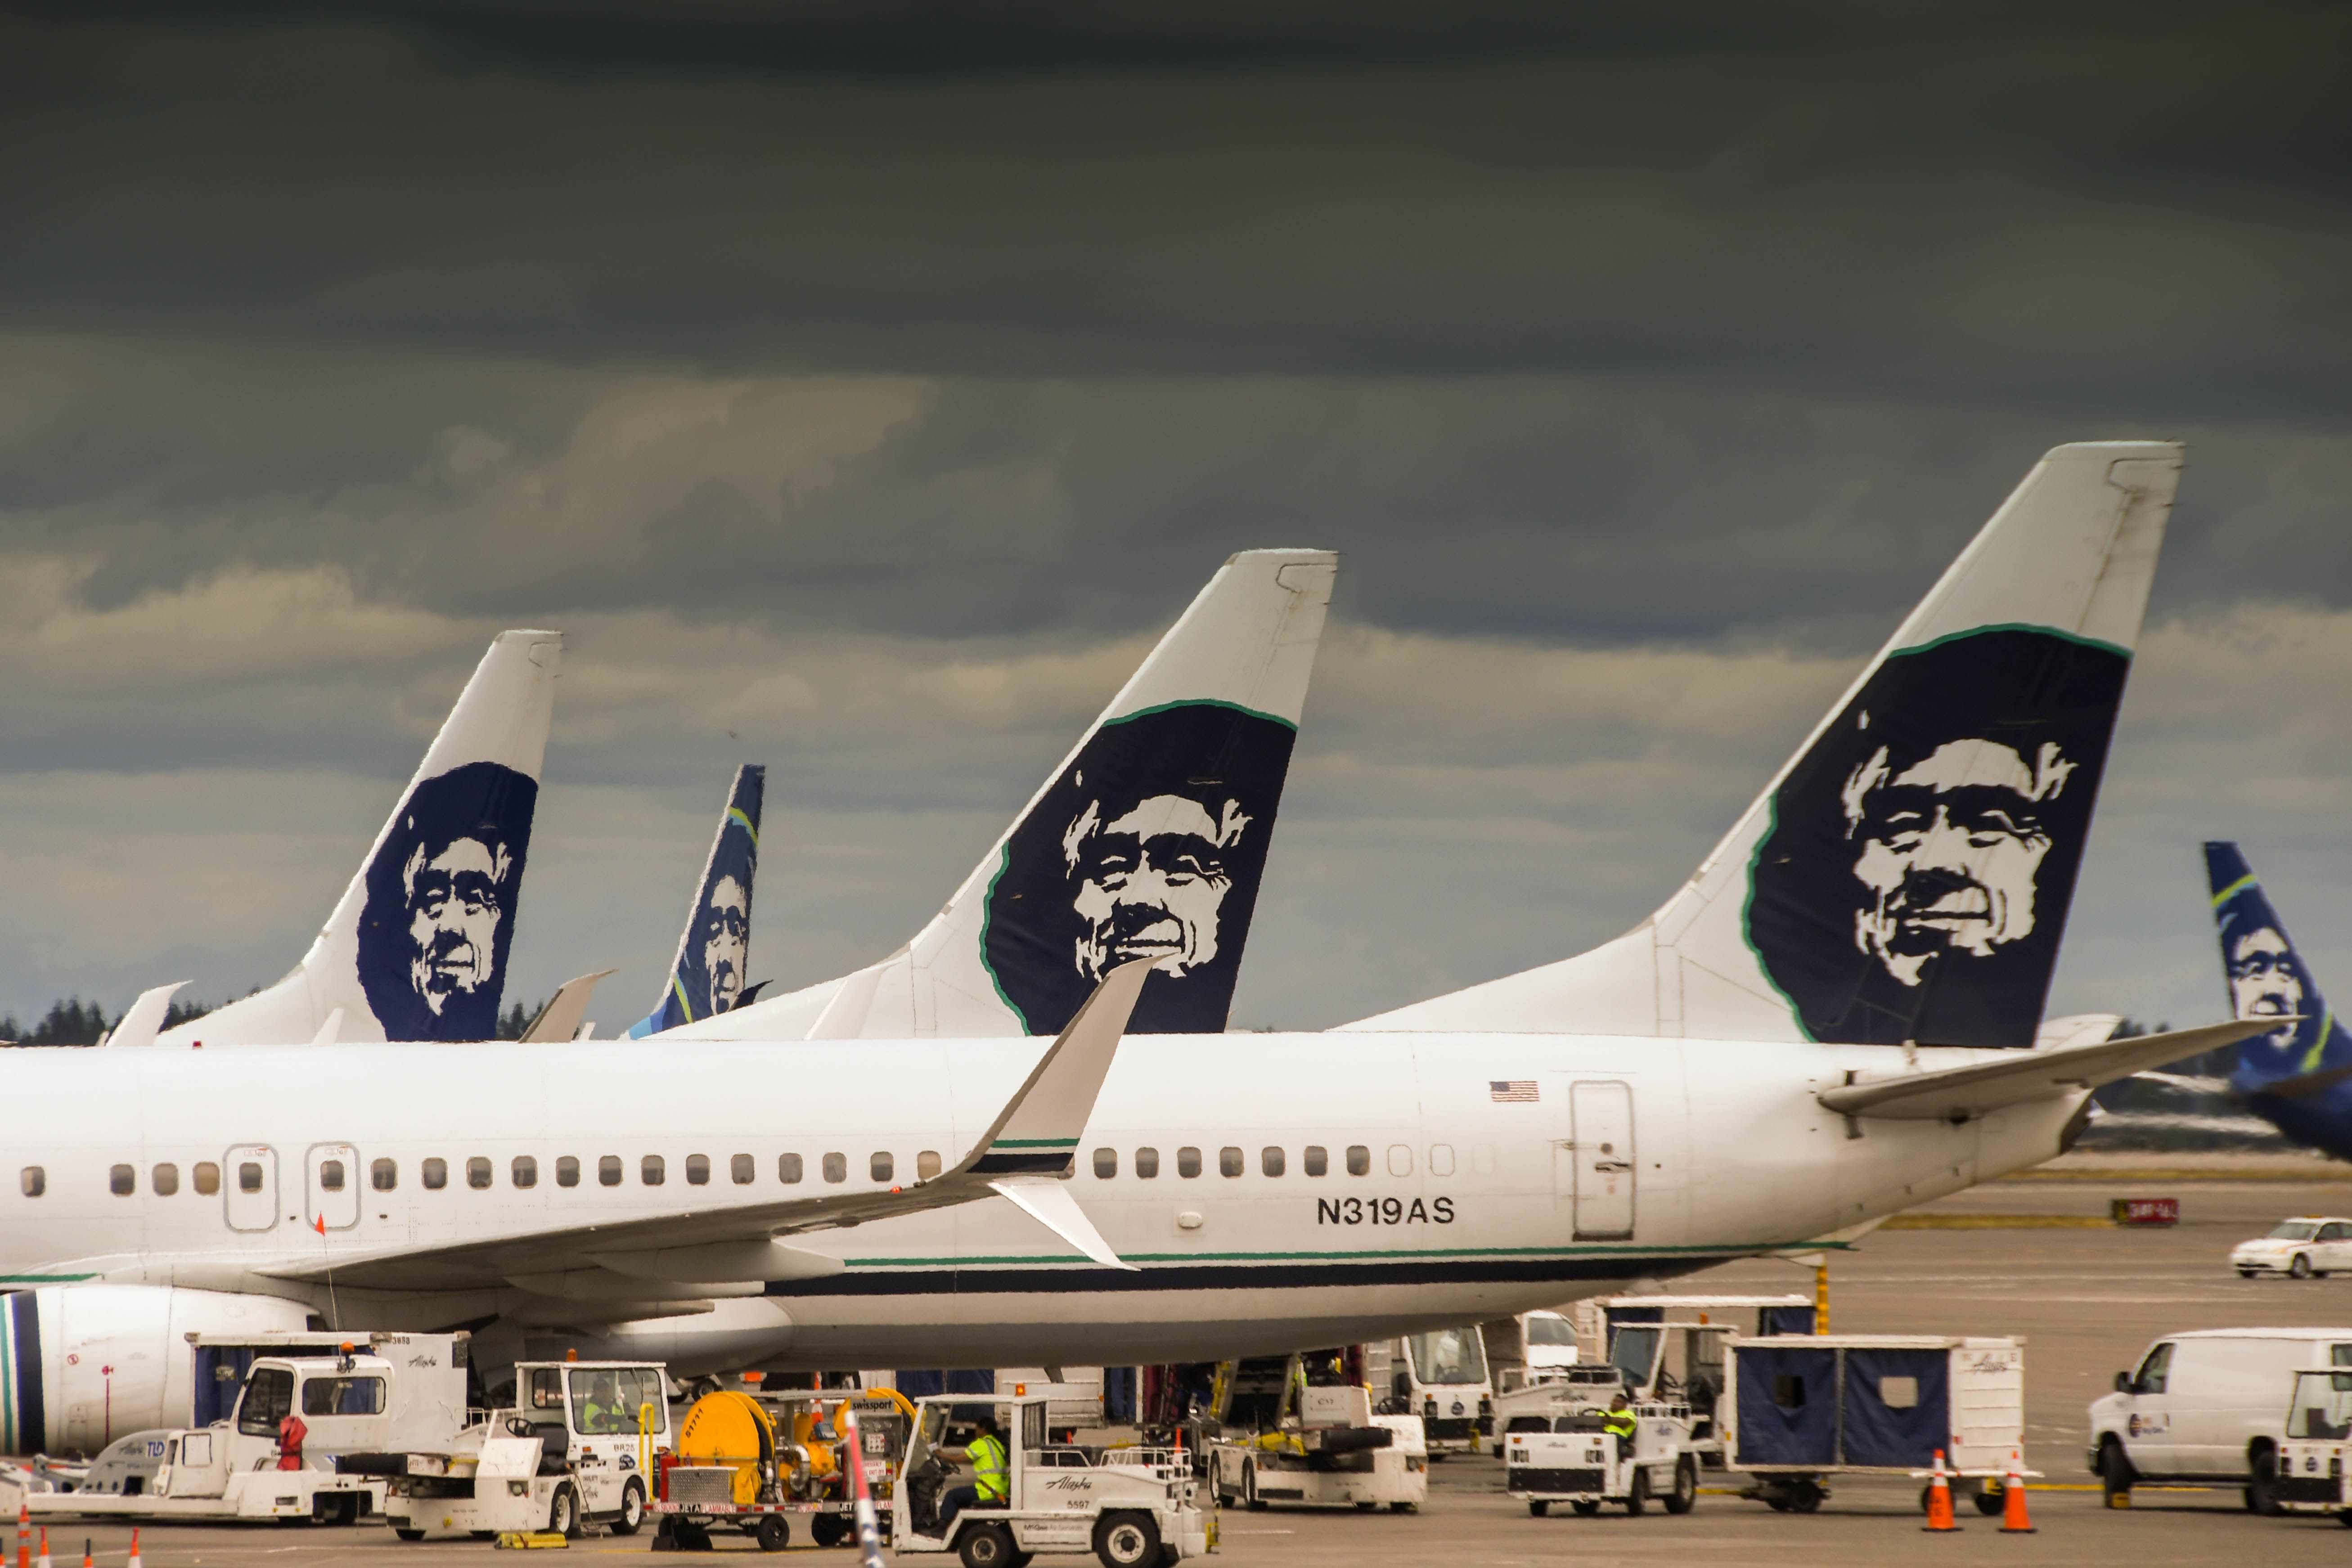 Alaska Airlines aircraft tails